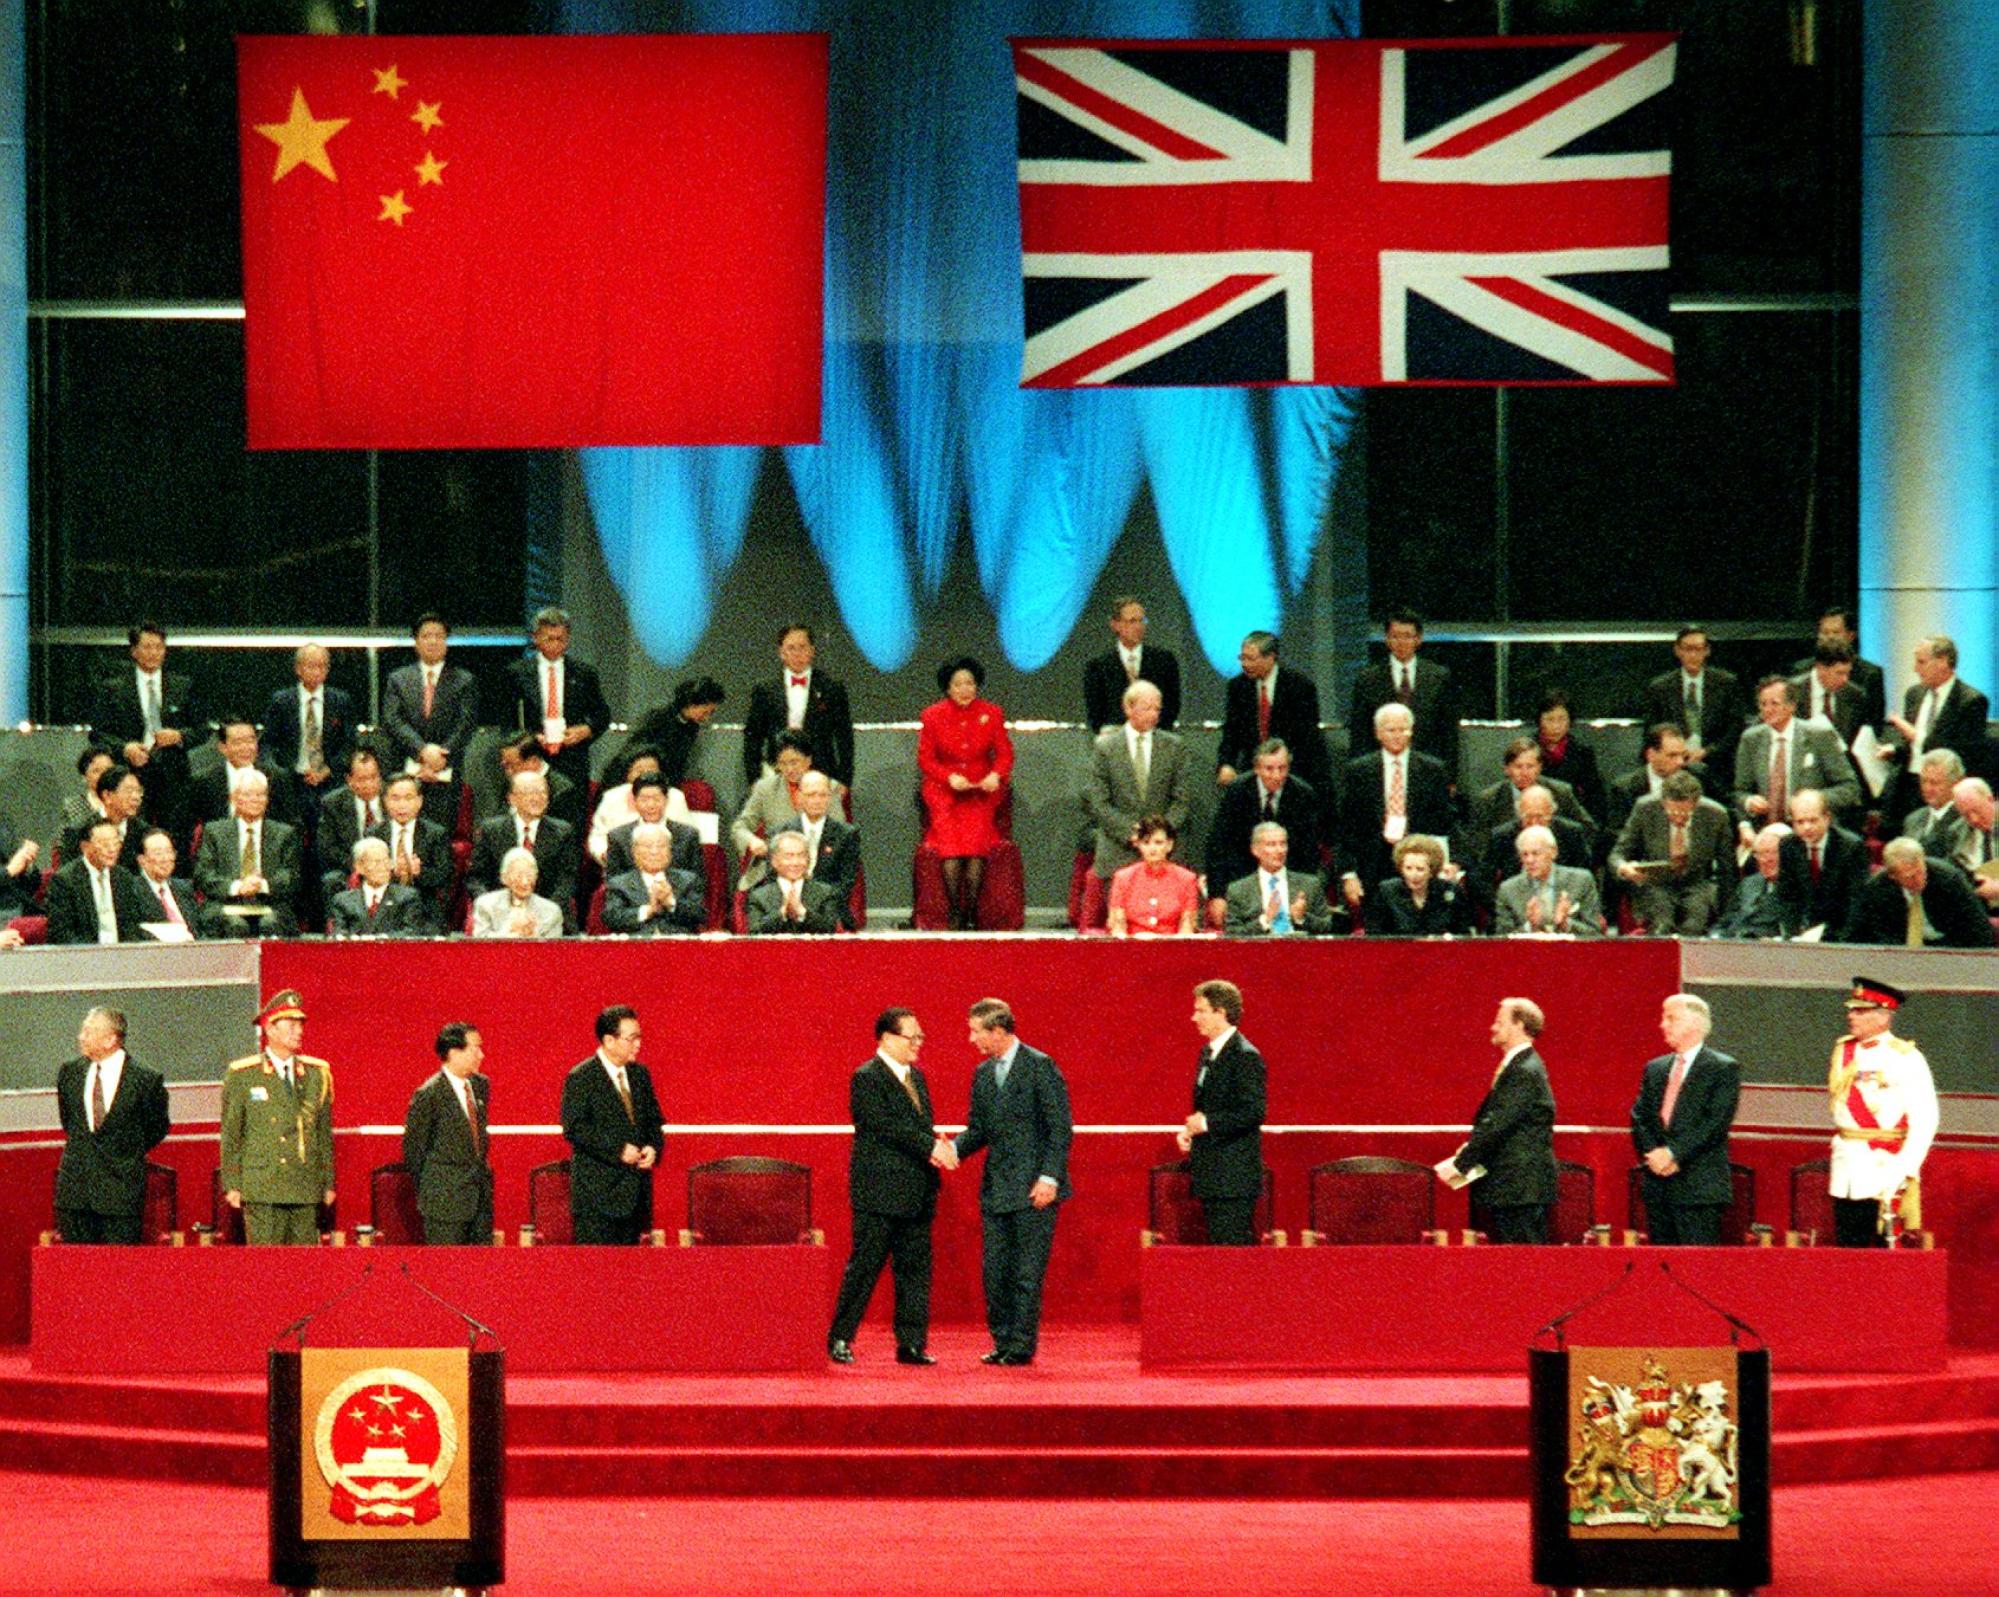 Jiang Zemin shakes hands with Prince Charles at the handover ceremony. Photo: SCMP